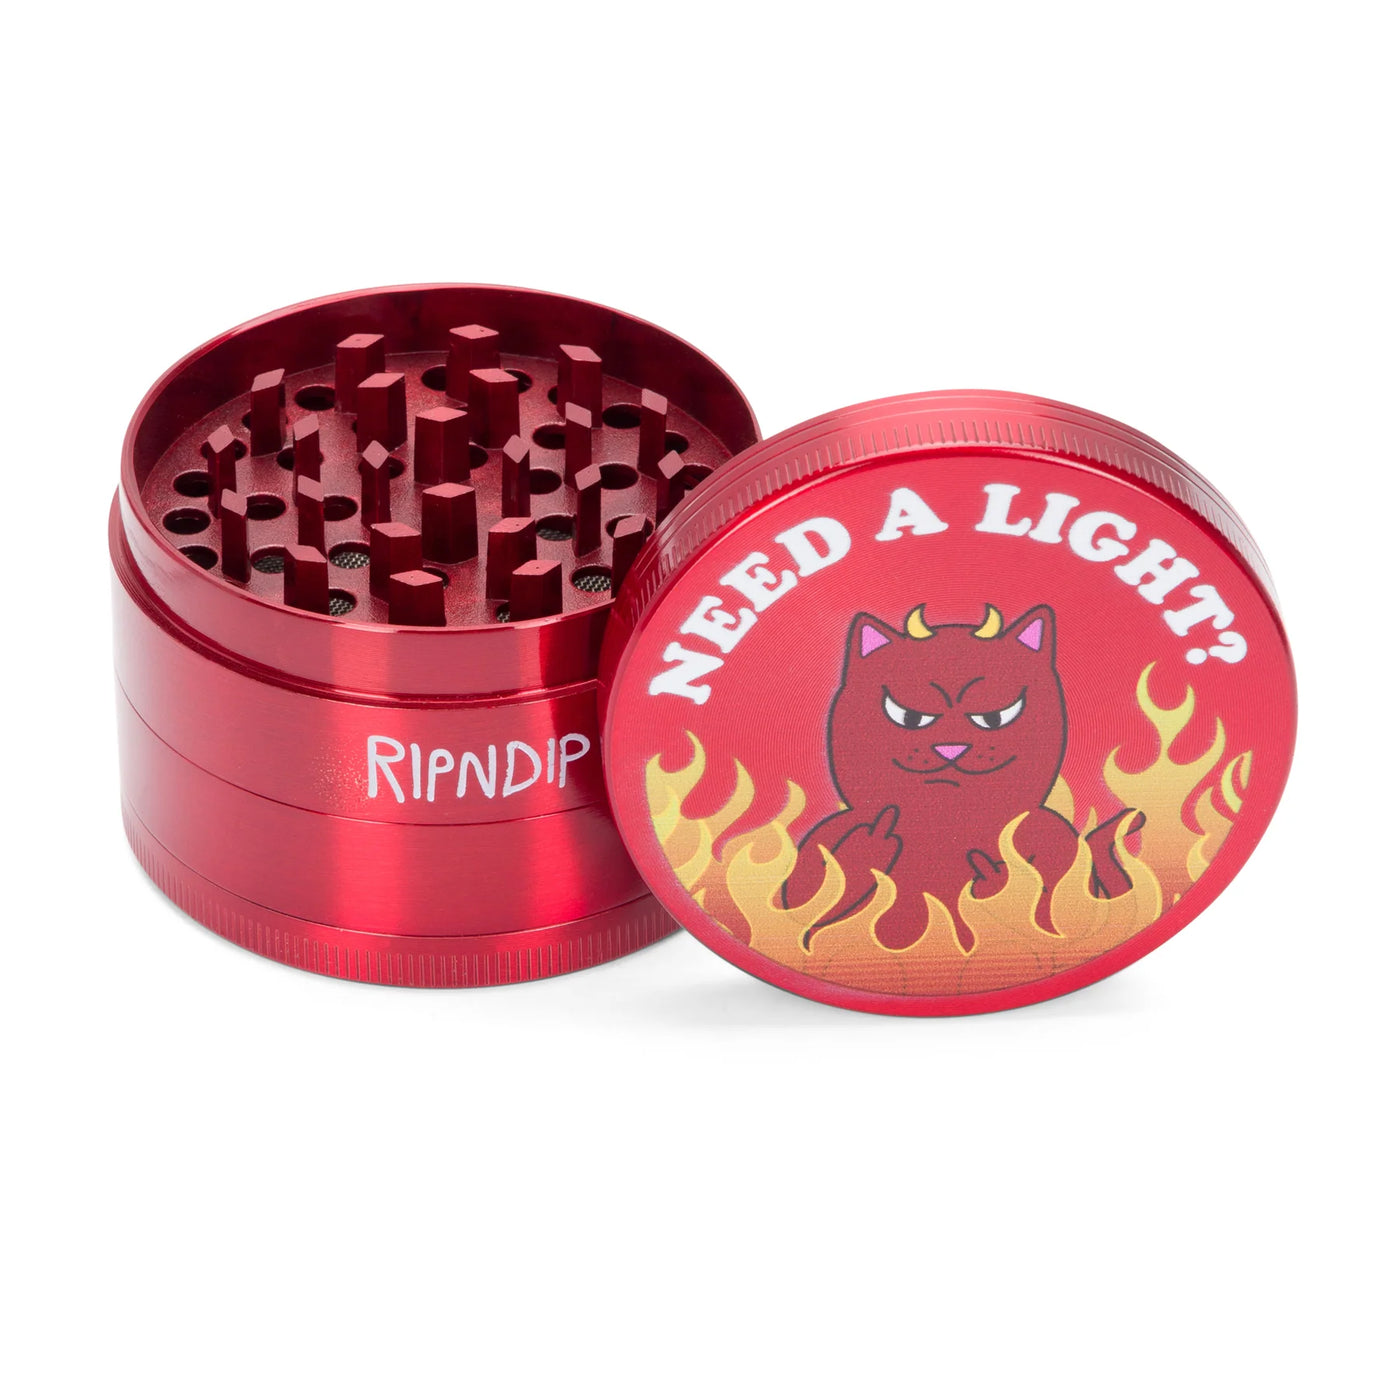 RipNDip Welcome To Heck Grinder - Red